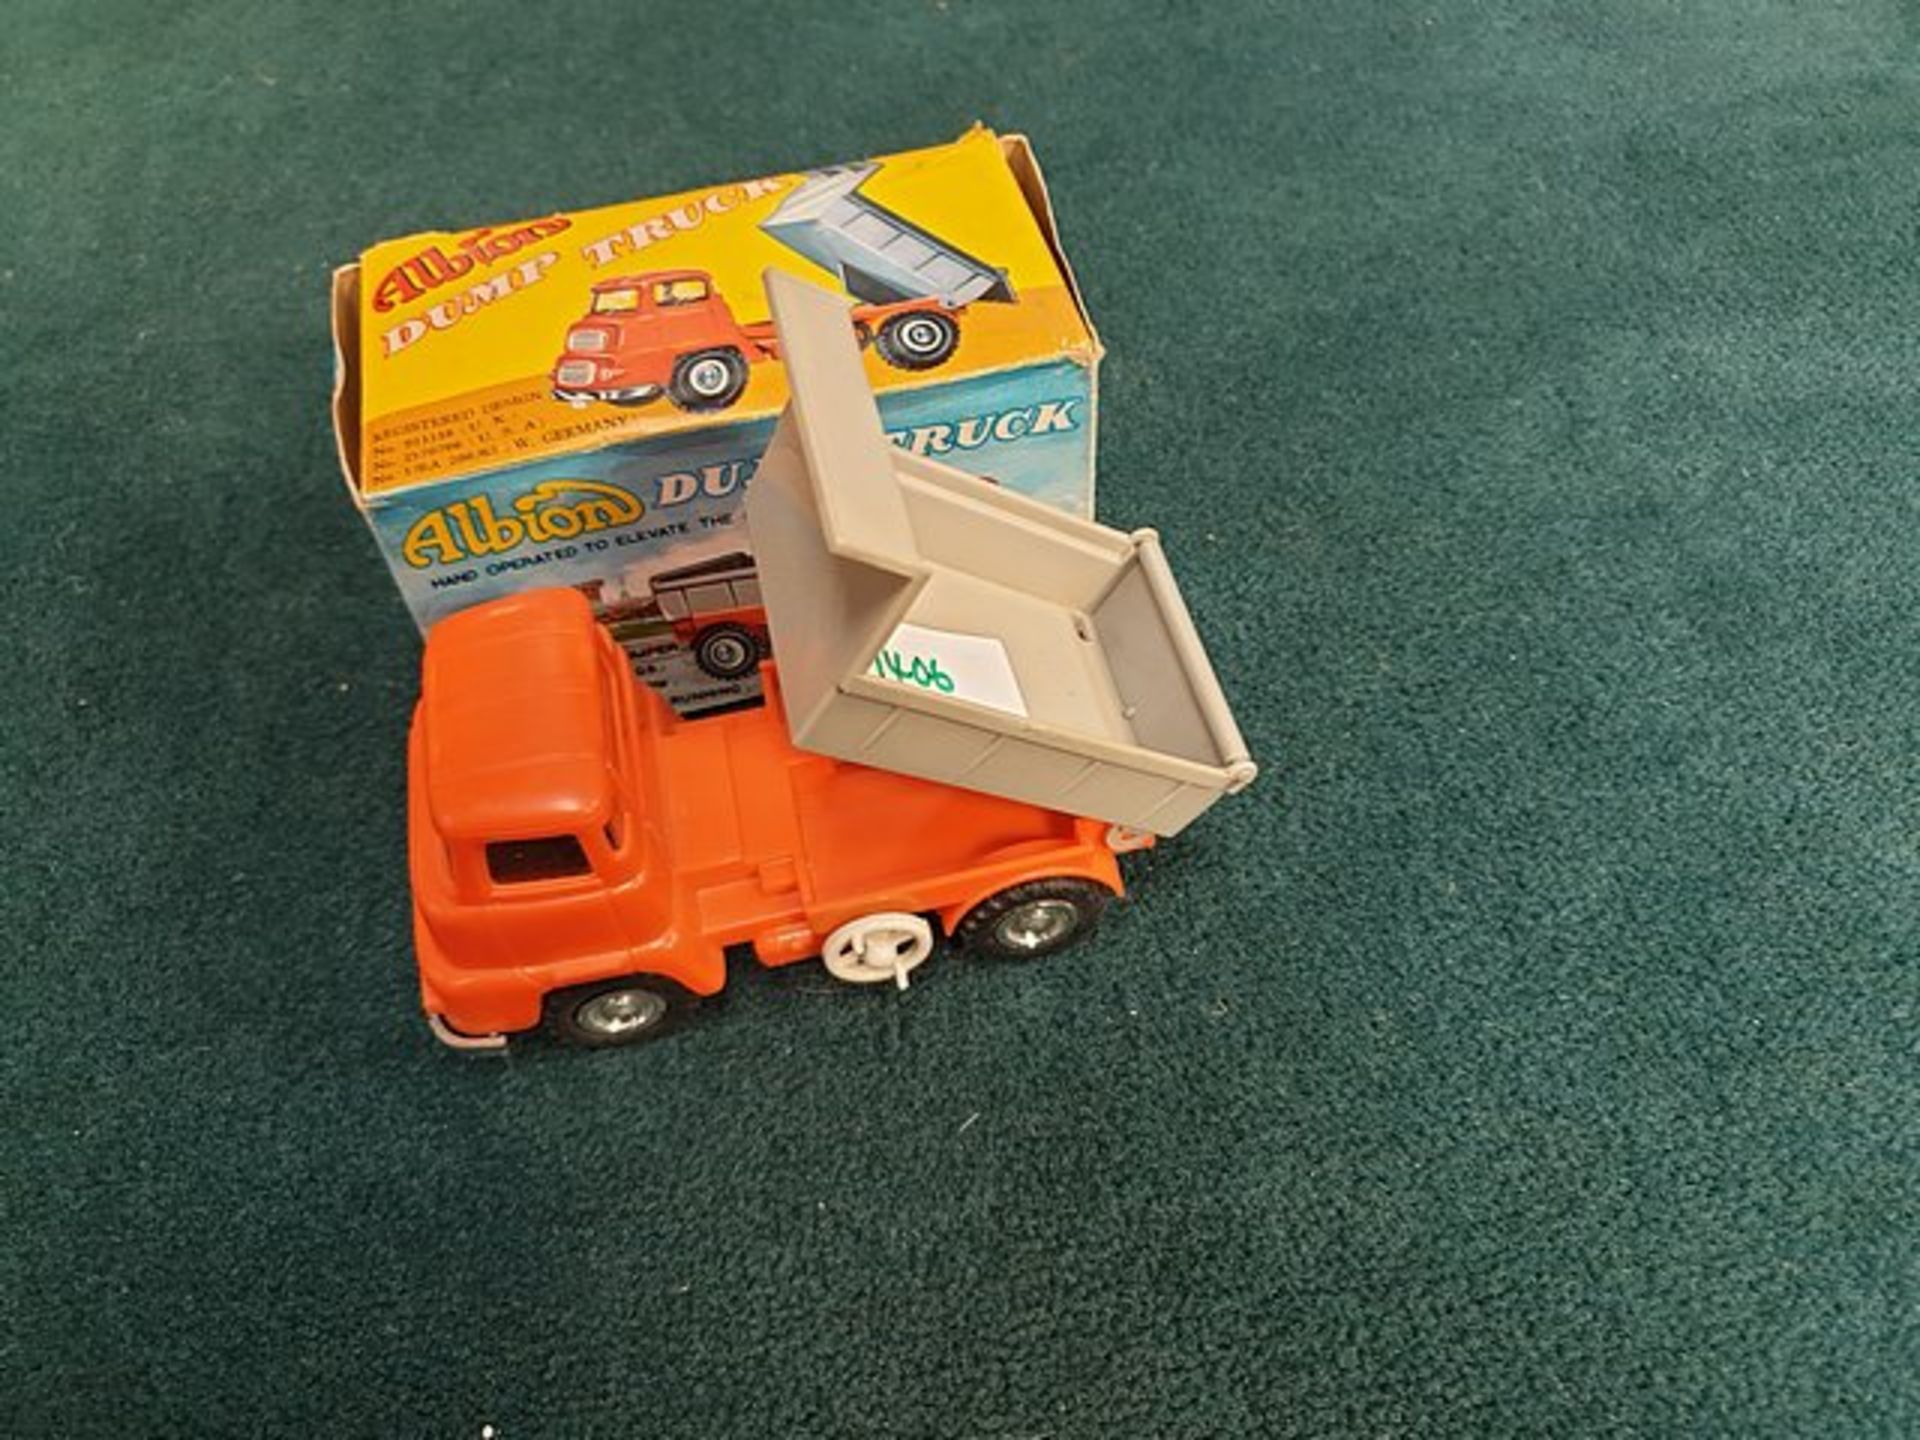 OK Toys (Hong Kong) # 3748 Friction Albion Dump Truck Complete With Box